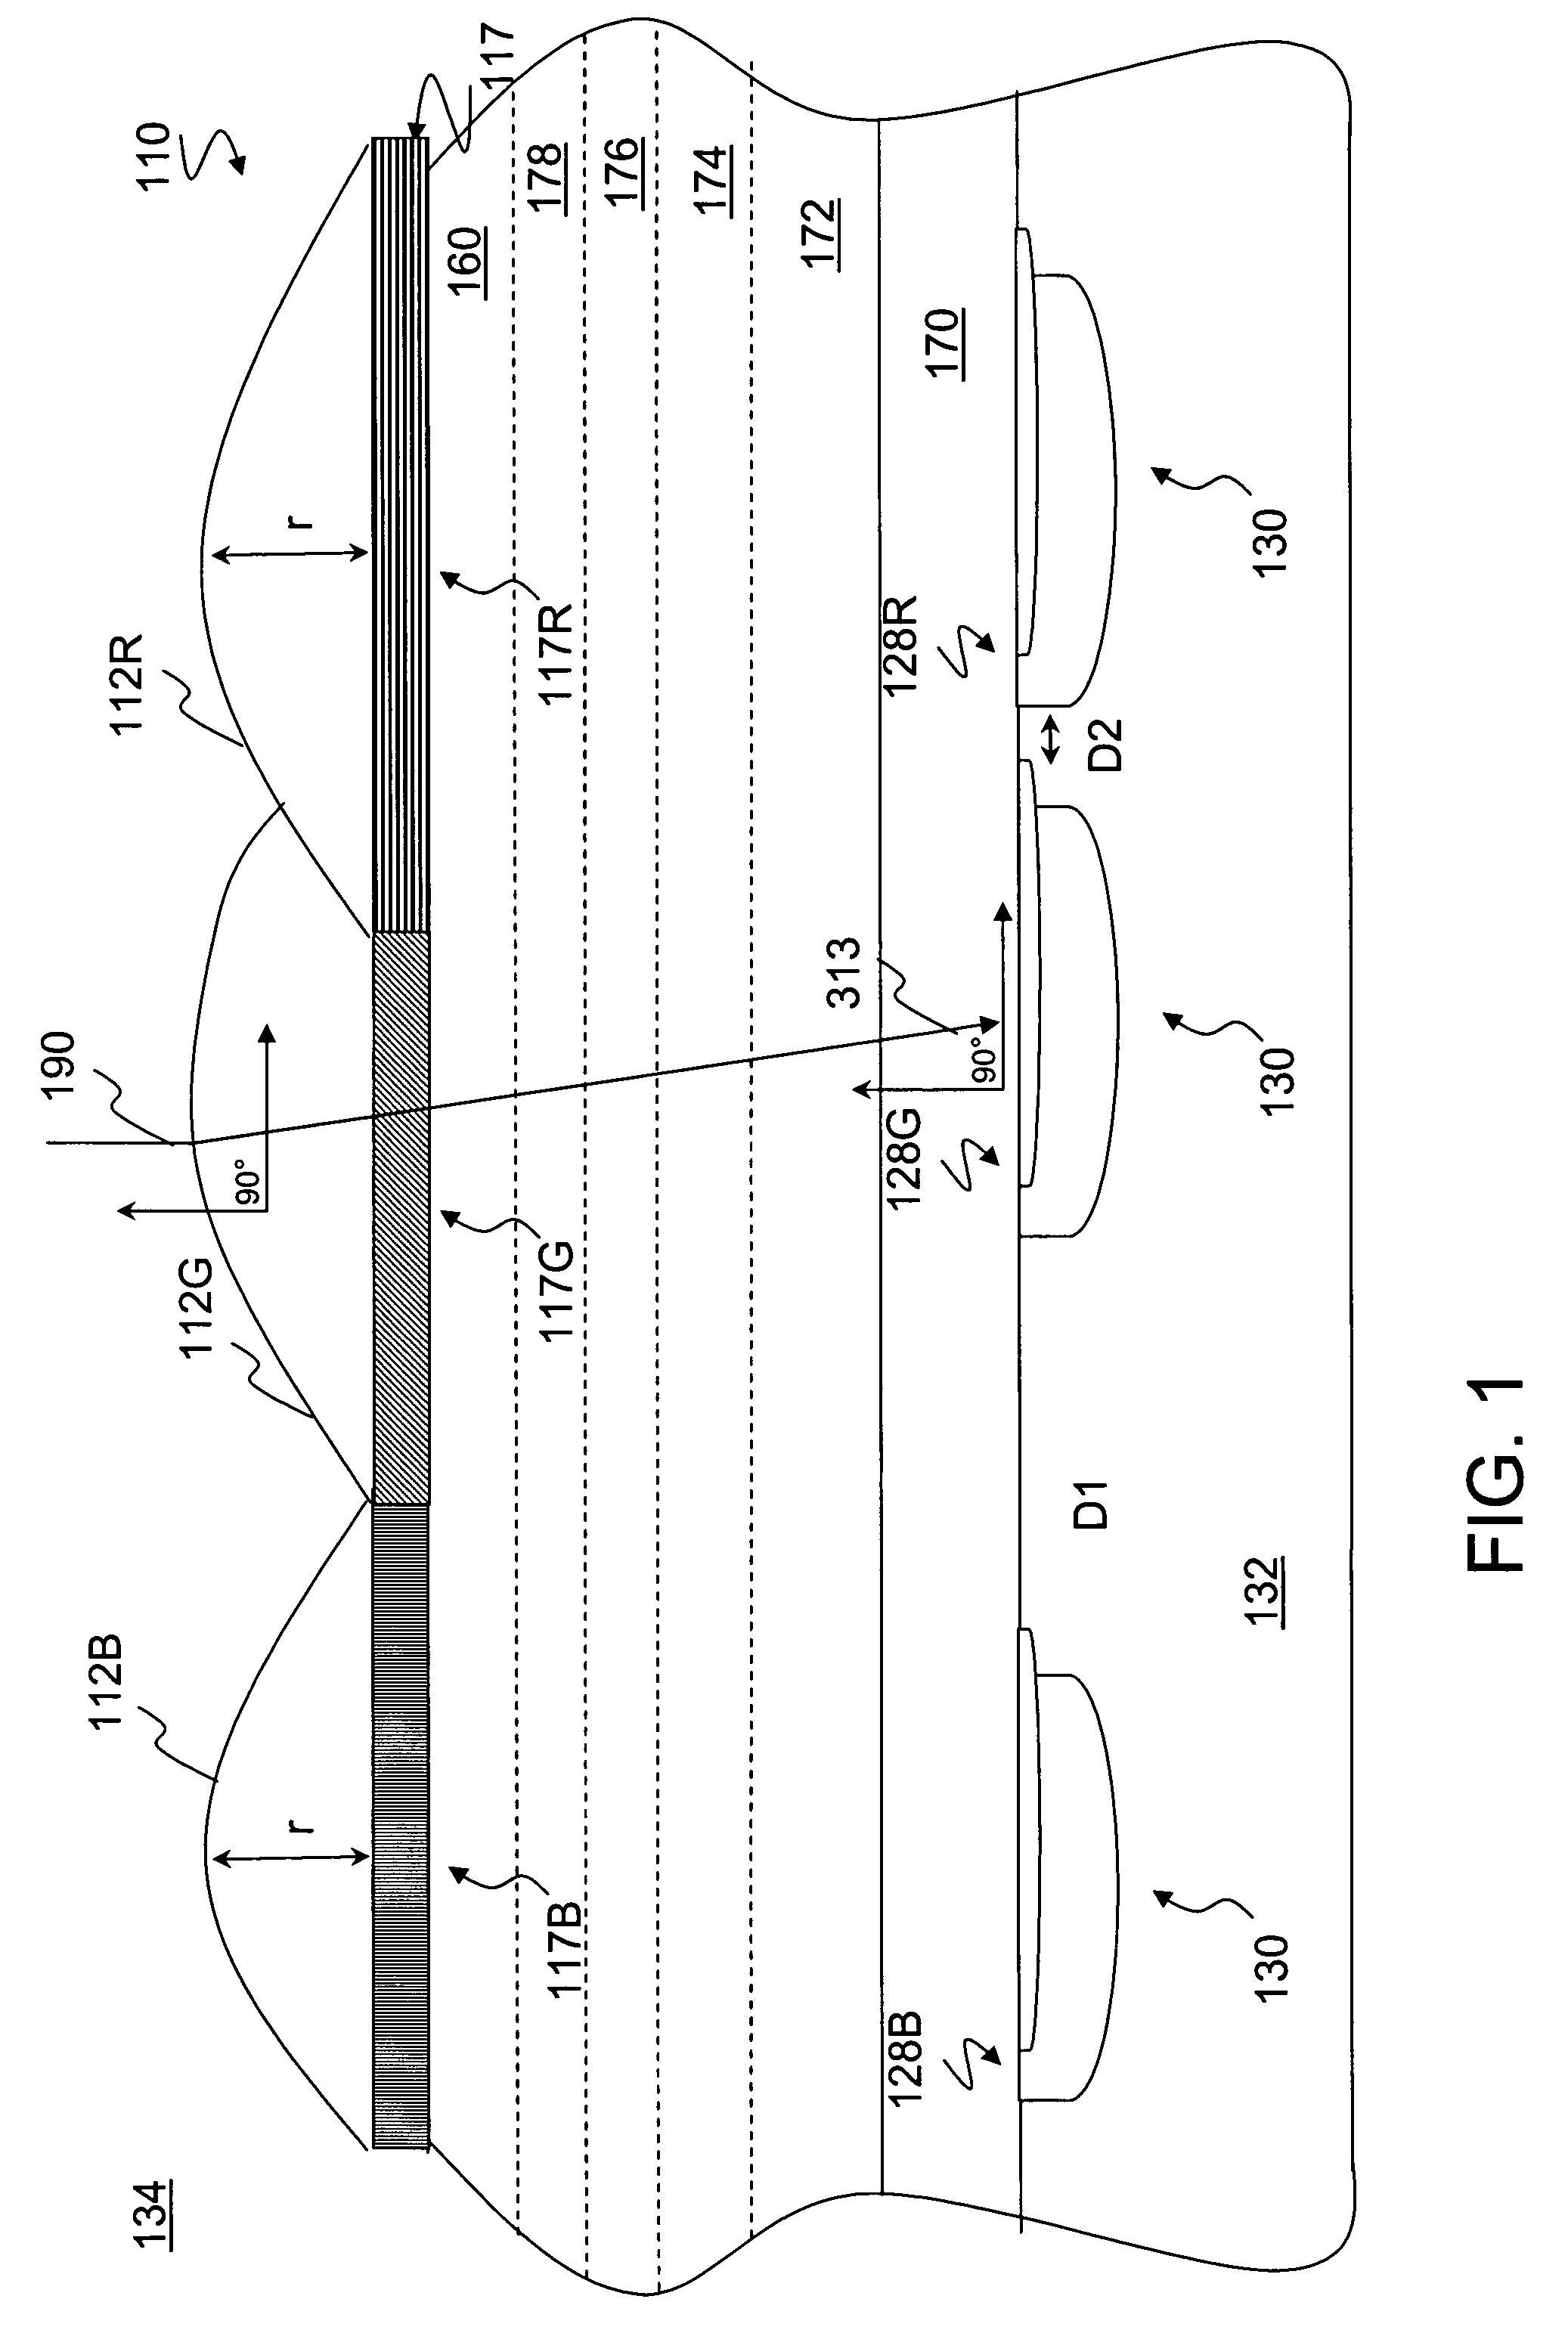 Gapless microlens array and method of fabrication